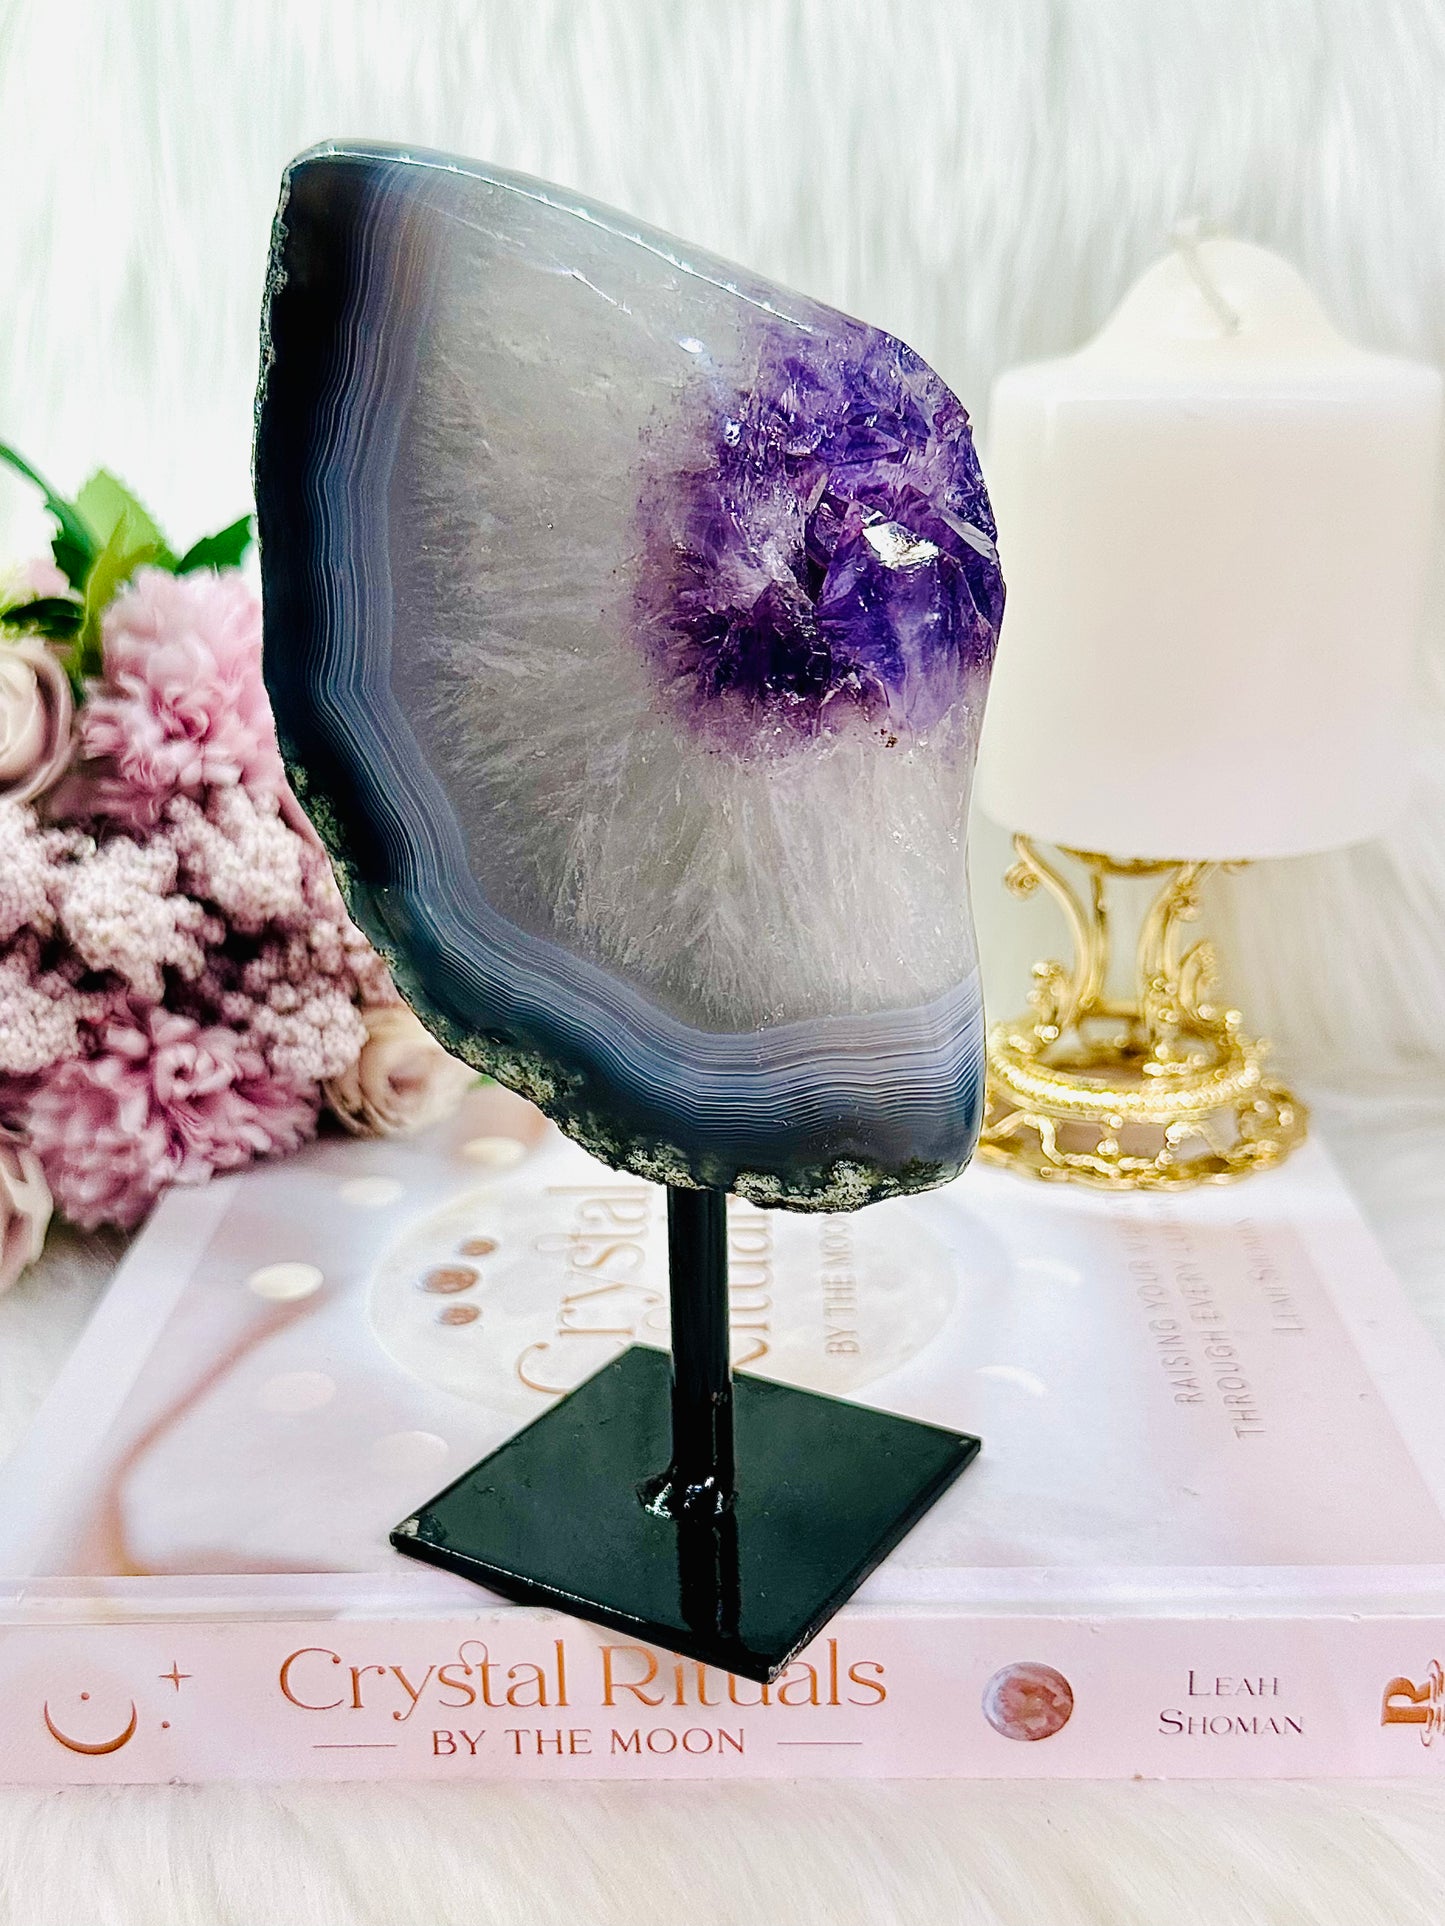 WOW! Absolutely Gorgeous Large 977gram Amethyst Agate Polished Freeform On Stand From Uruguay